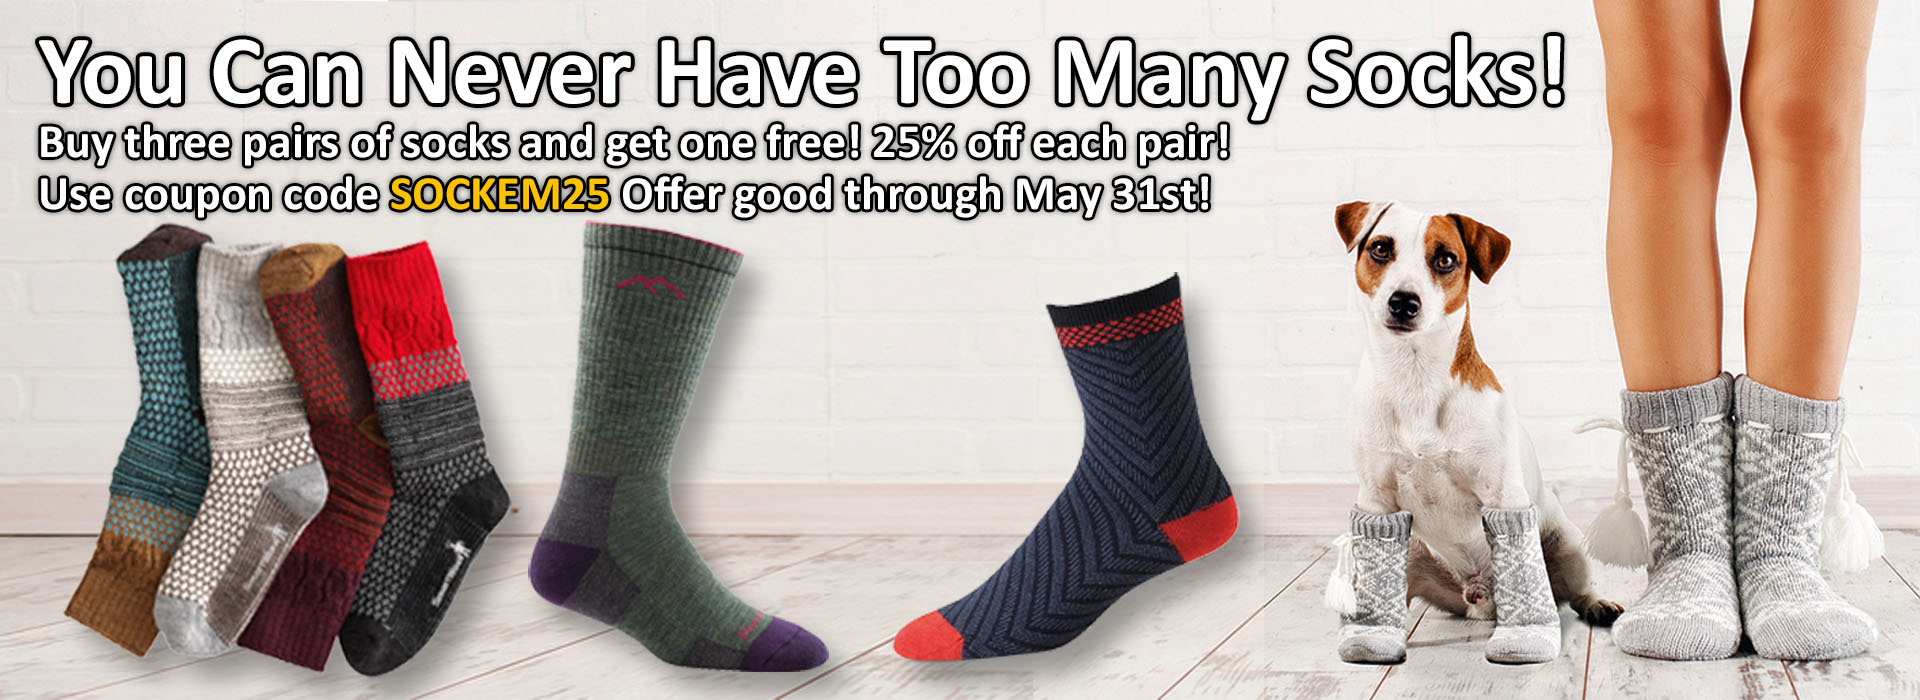 You Can Never Have Too Many Socks! Buy three pairs of socks and get one free! 25% off each pair! Use coupon code SOCKEM25 Offer good through May 31st!